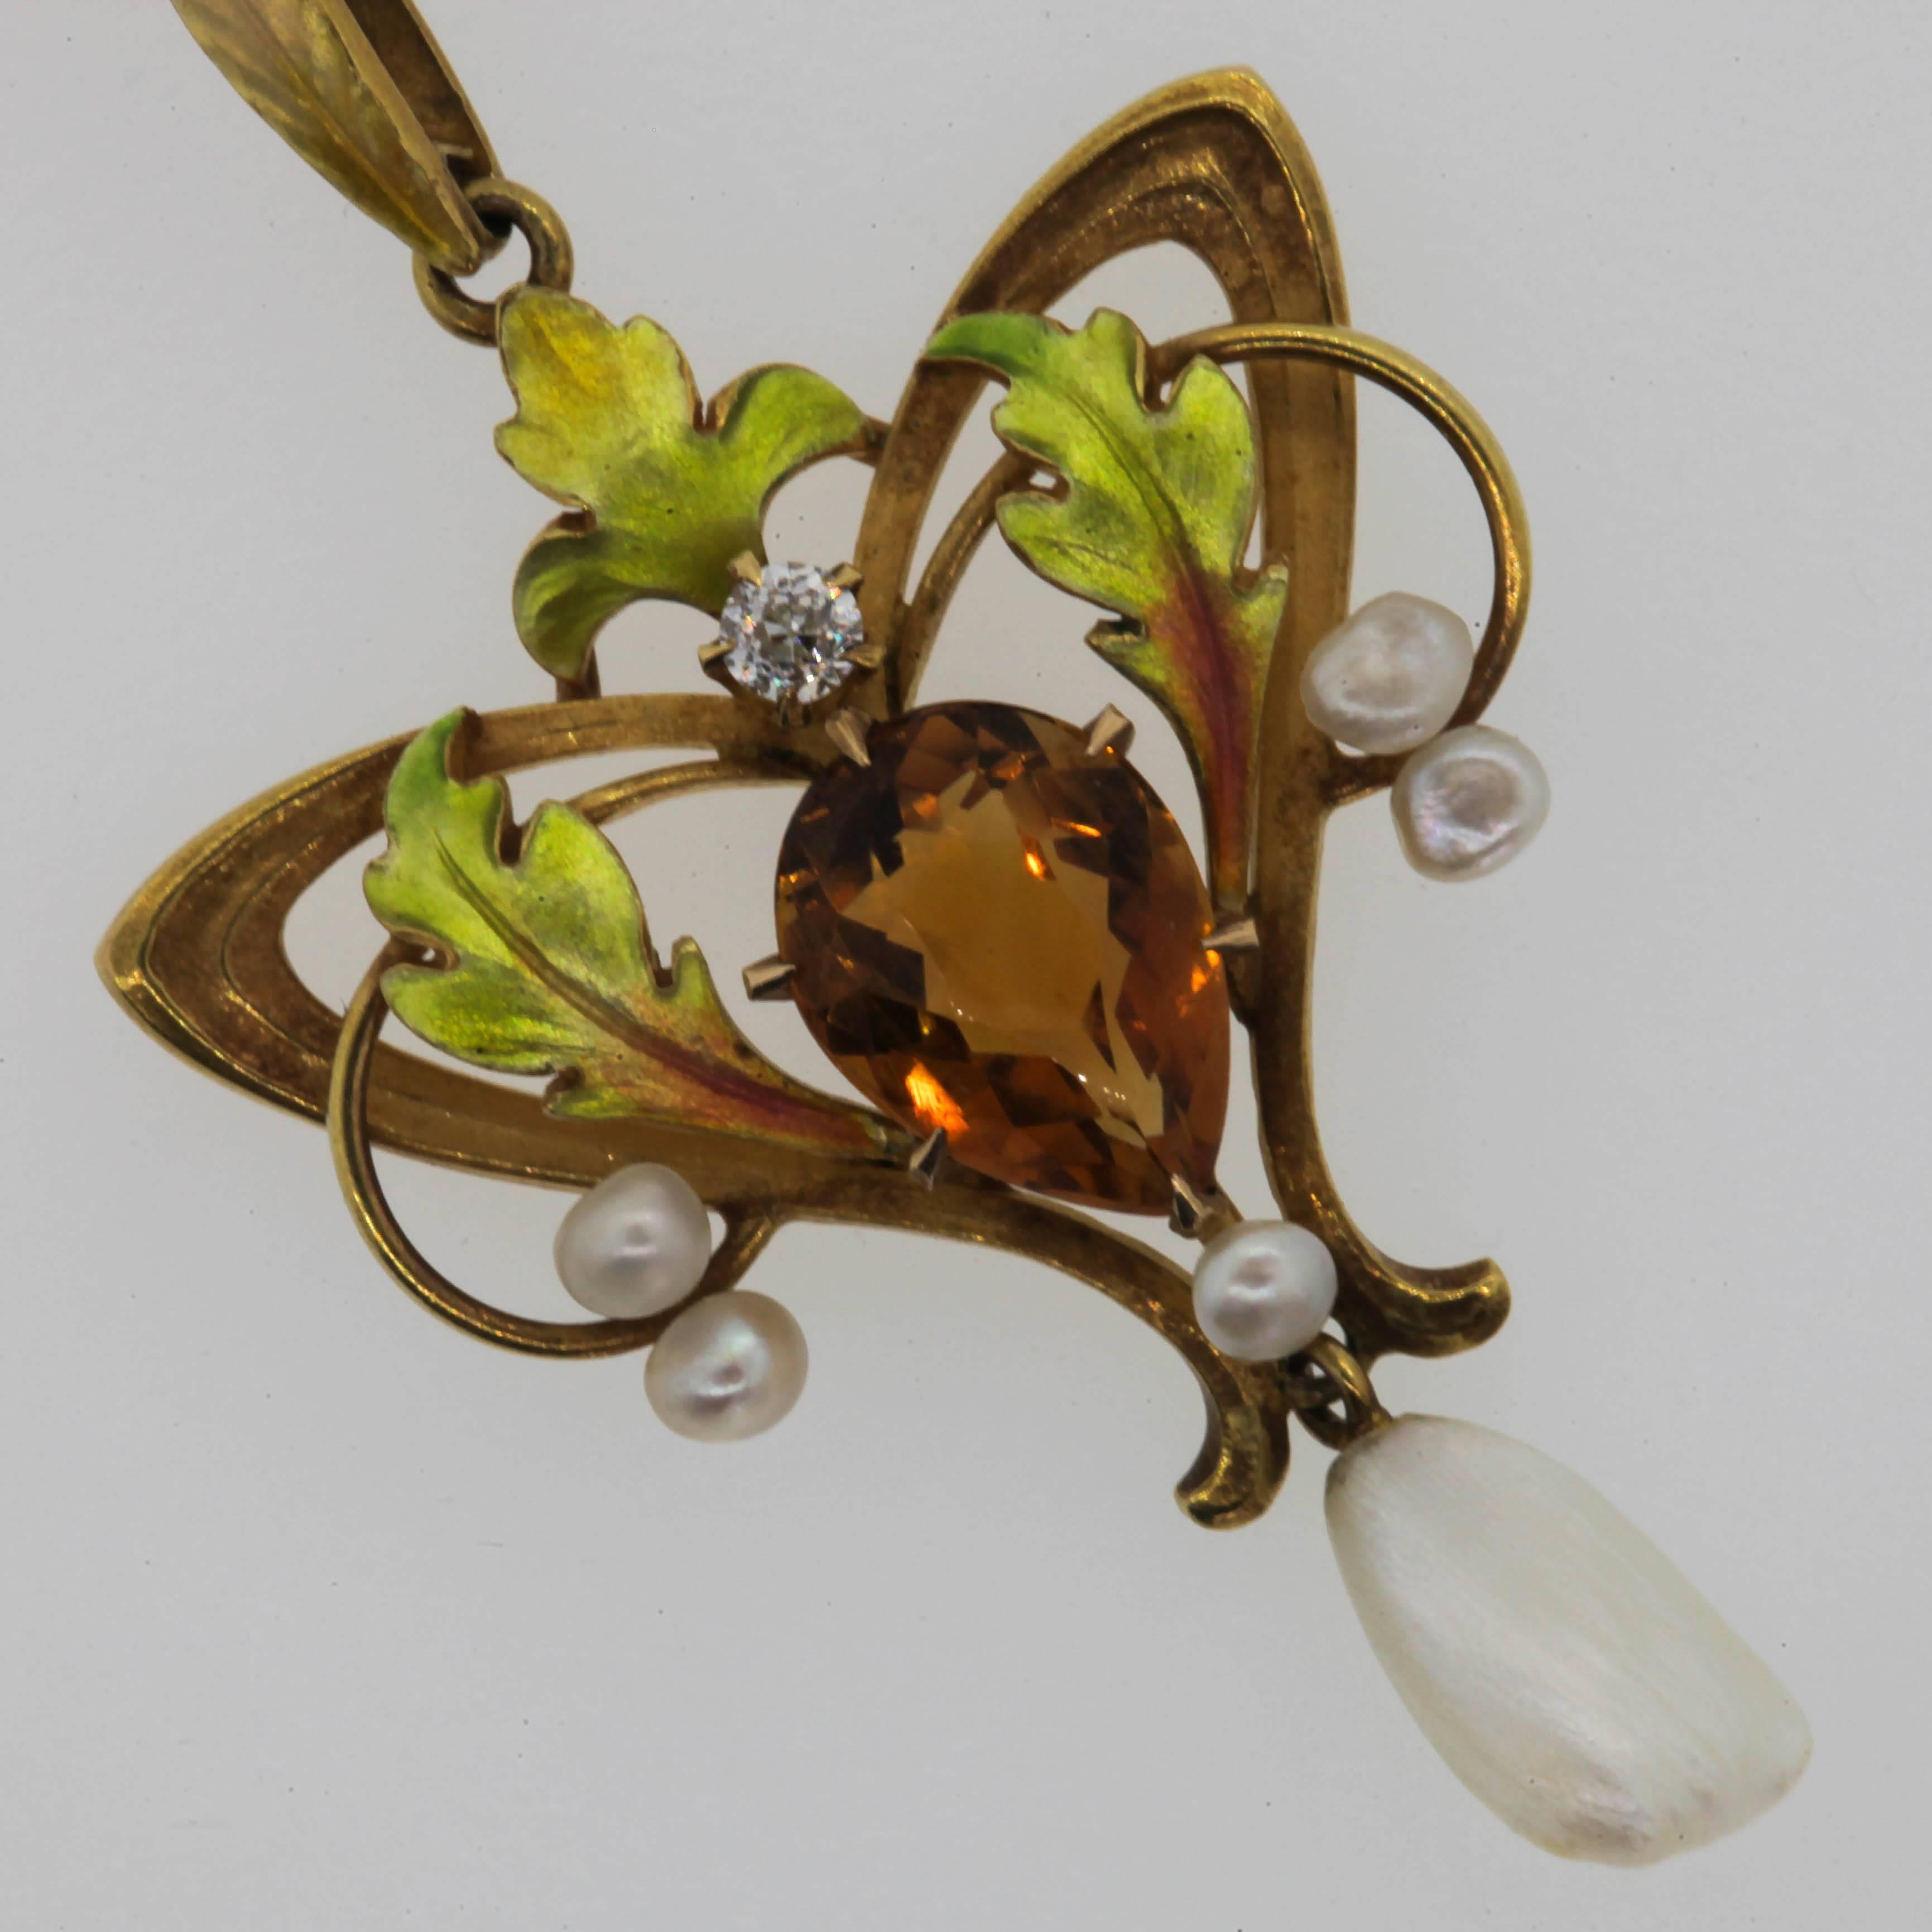 Time for Romance!  This docile turn of the 20th Century pendant shows off flowing intertwining triangular and swoop designs completed with variegated enamel leaves.  It nests a 1.15 carat a pear shape orange Citrine, dangles a natural fresh water